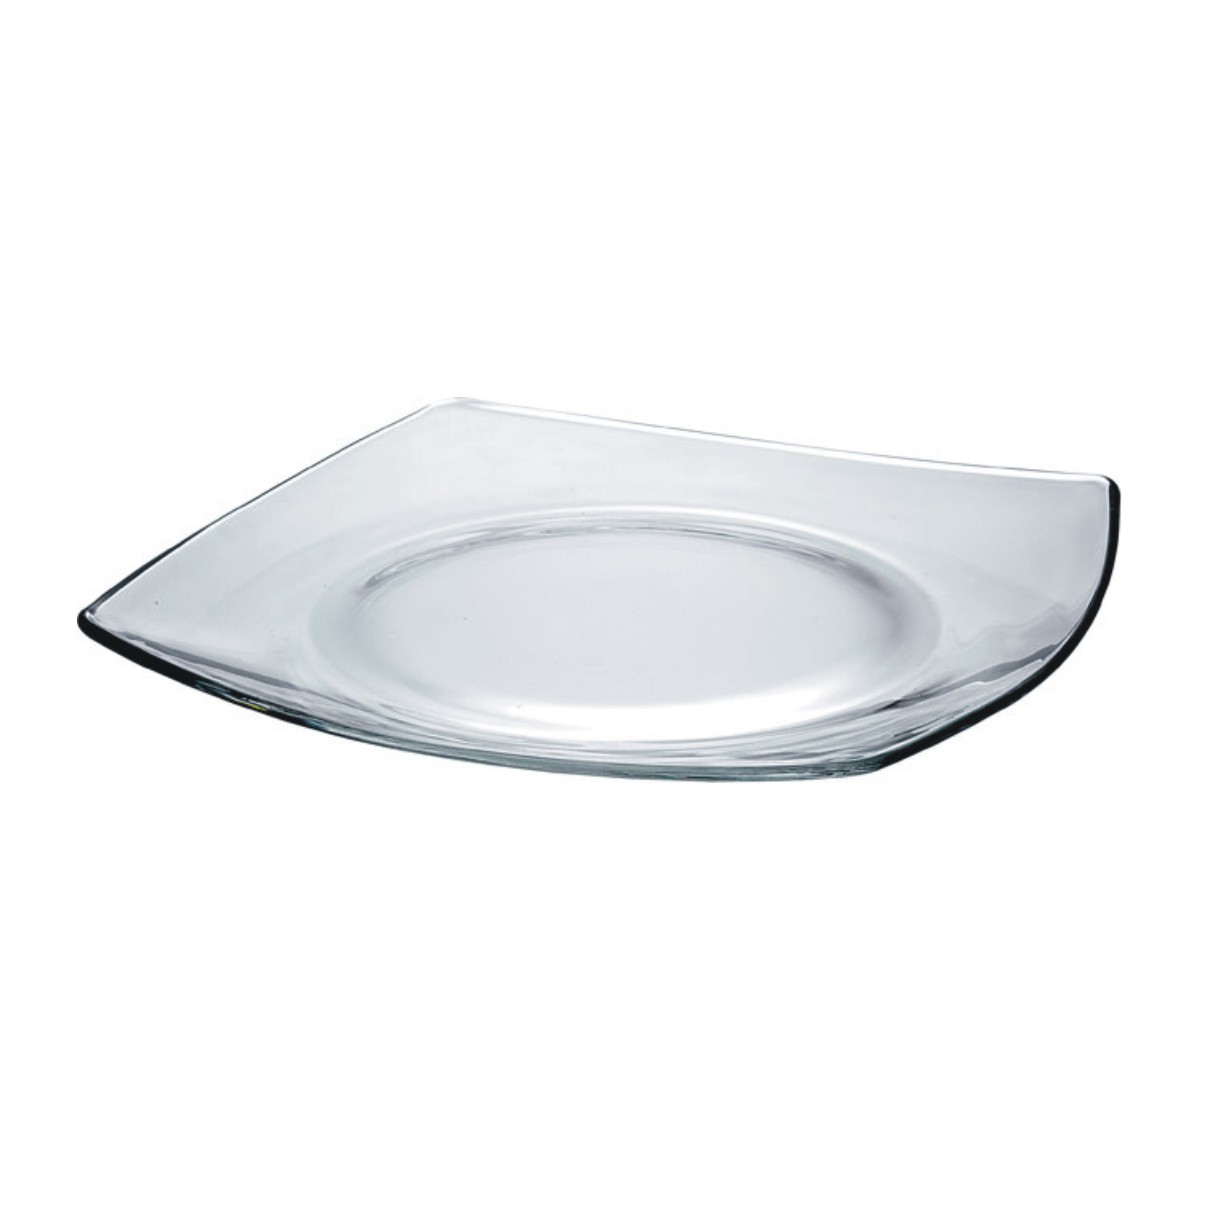 glass oven dish